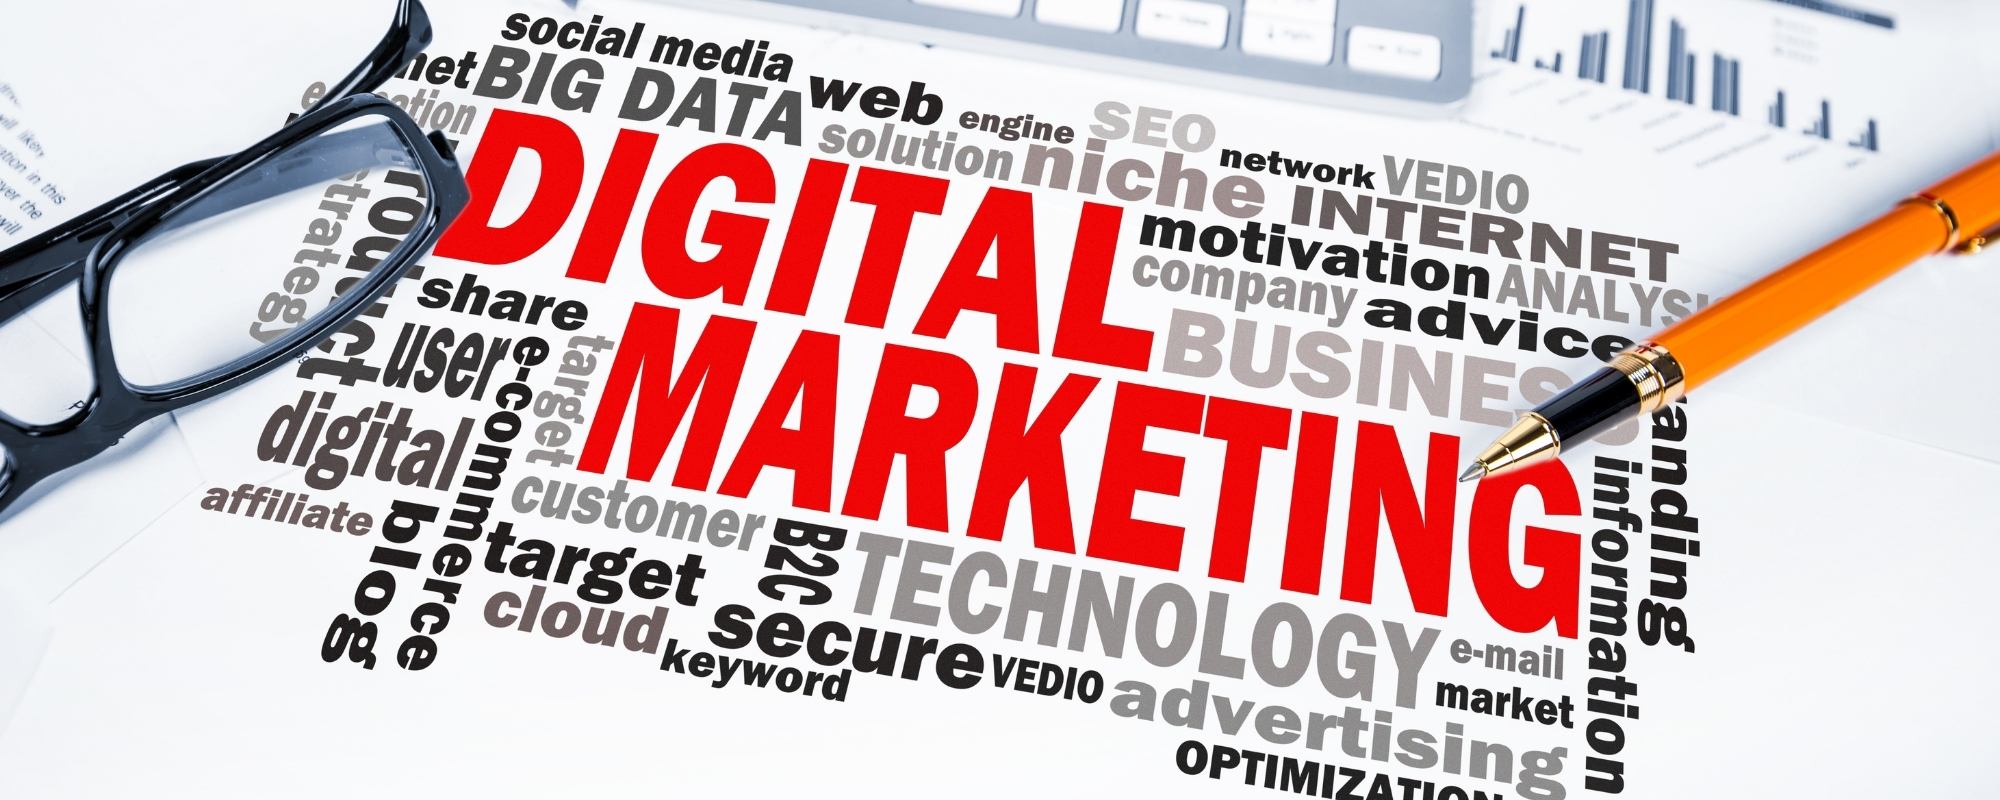 Digital marketing services by tech4life